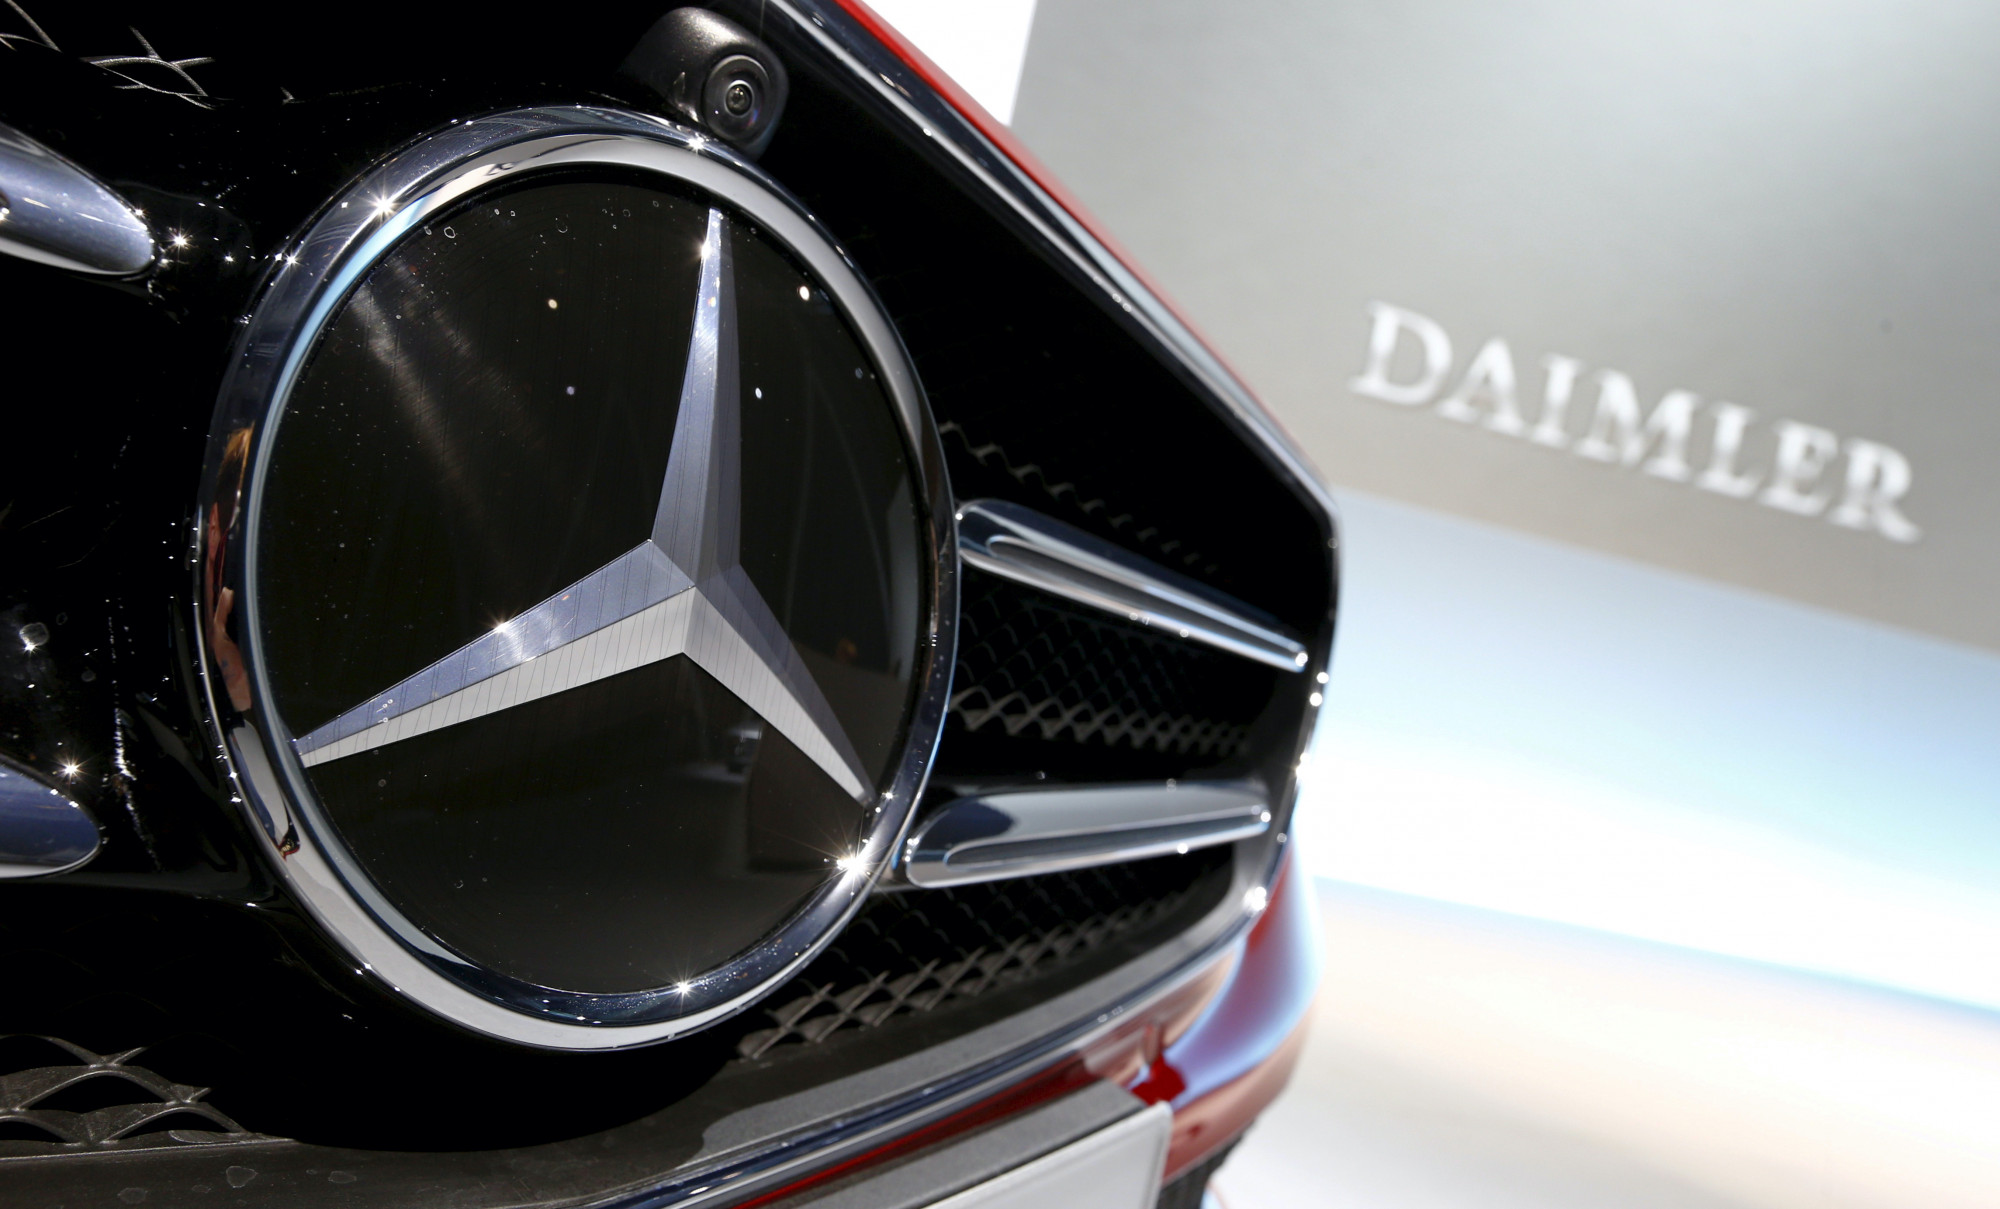 Mercedes Recalls 750,000 Cars Because Sunroof Can Fly Off